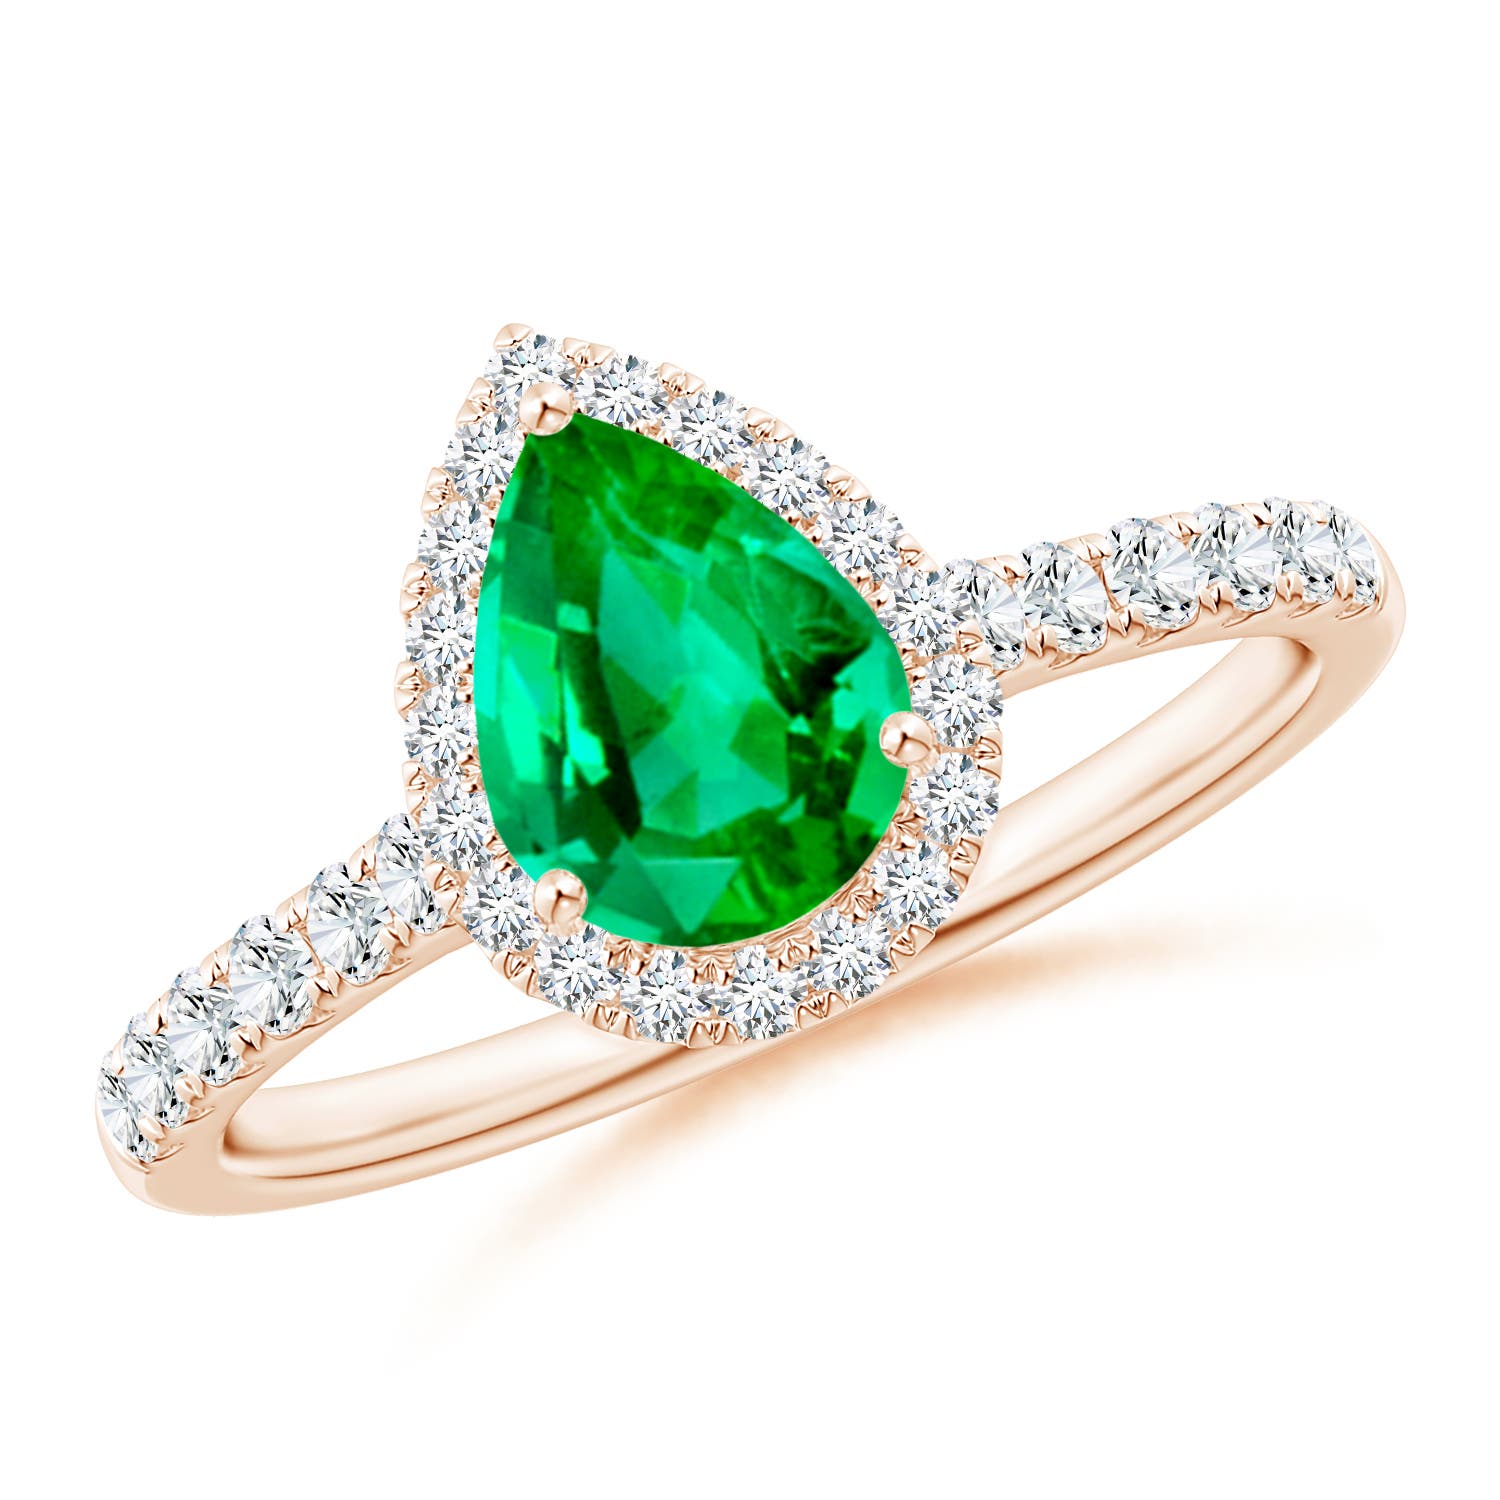 AAA - Emerald / 1.32 CT / 14 KT Rose Gold